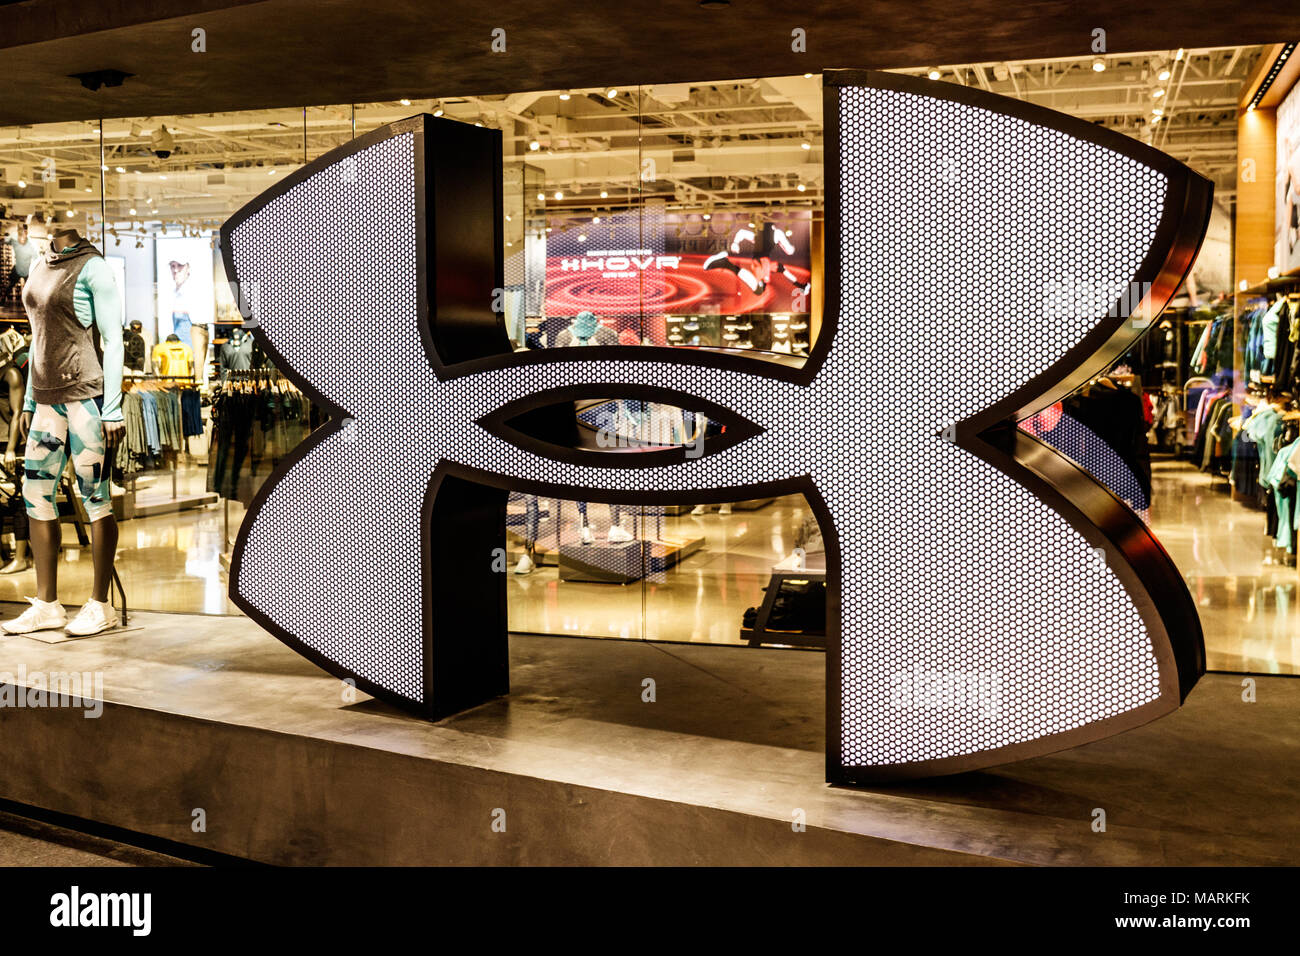 Indianapolis - Circa April 2018: Under Armour retail mall location. Under Armour manufactures a popular line of sporting equipment apparel I Stock Photo